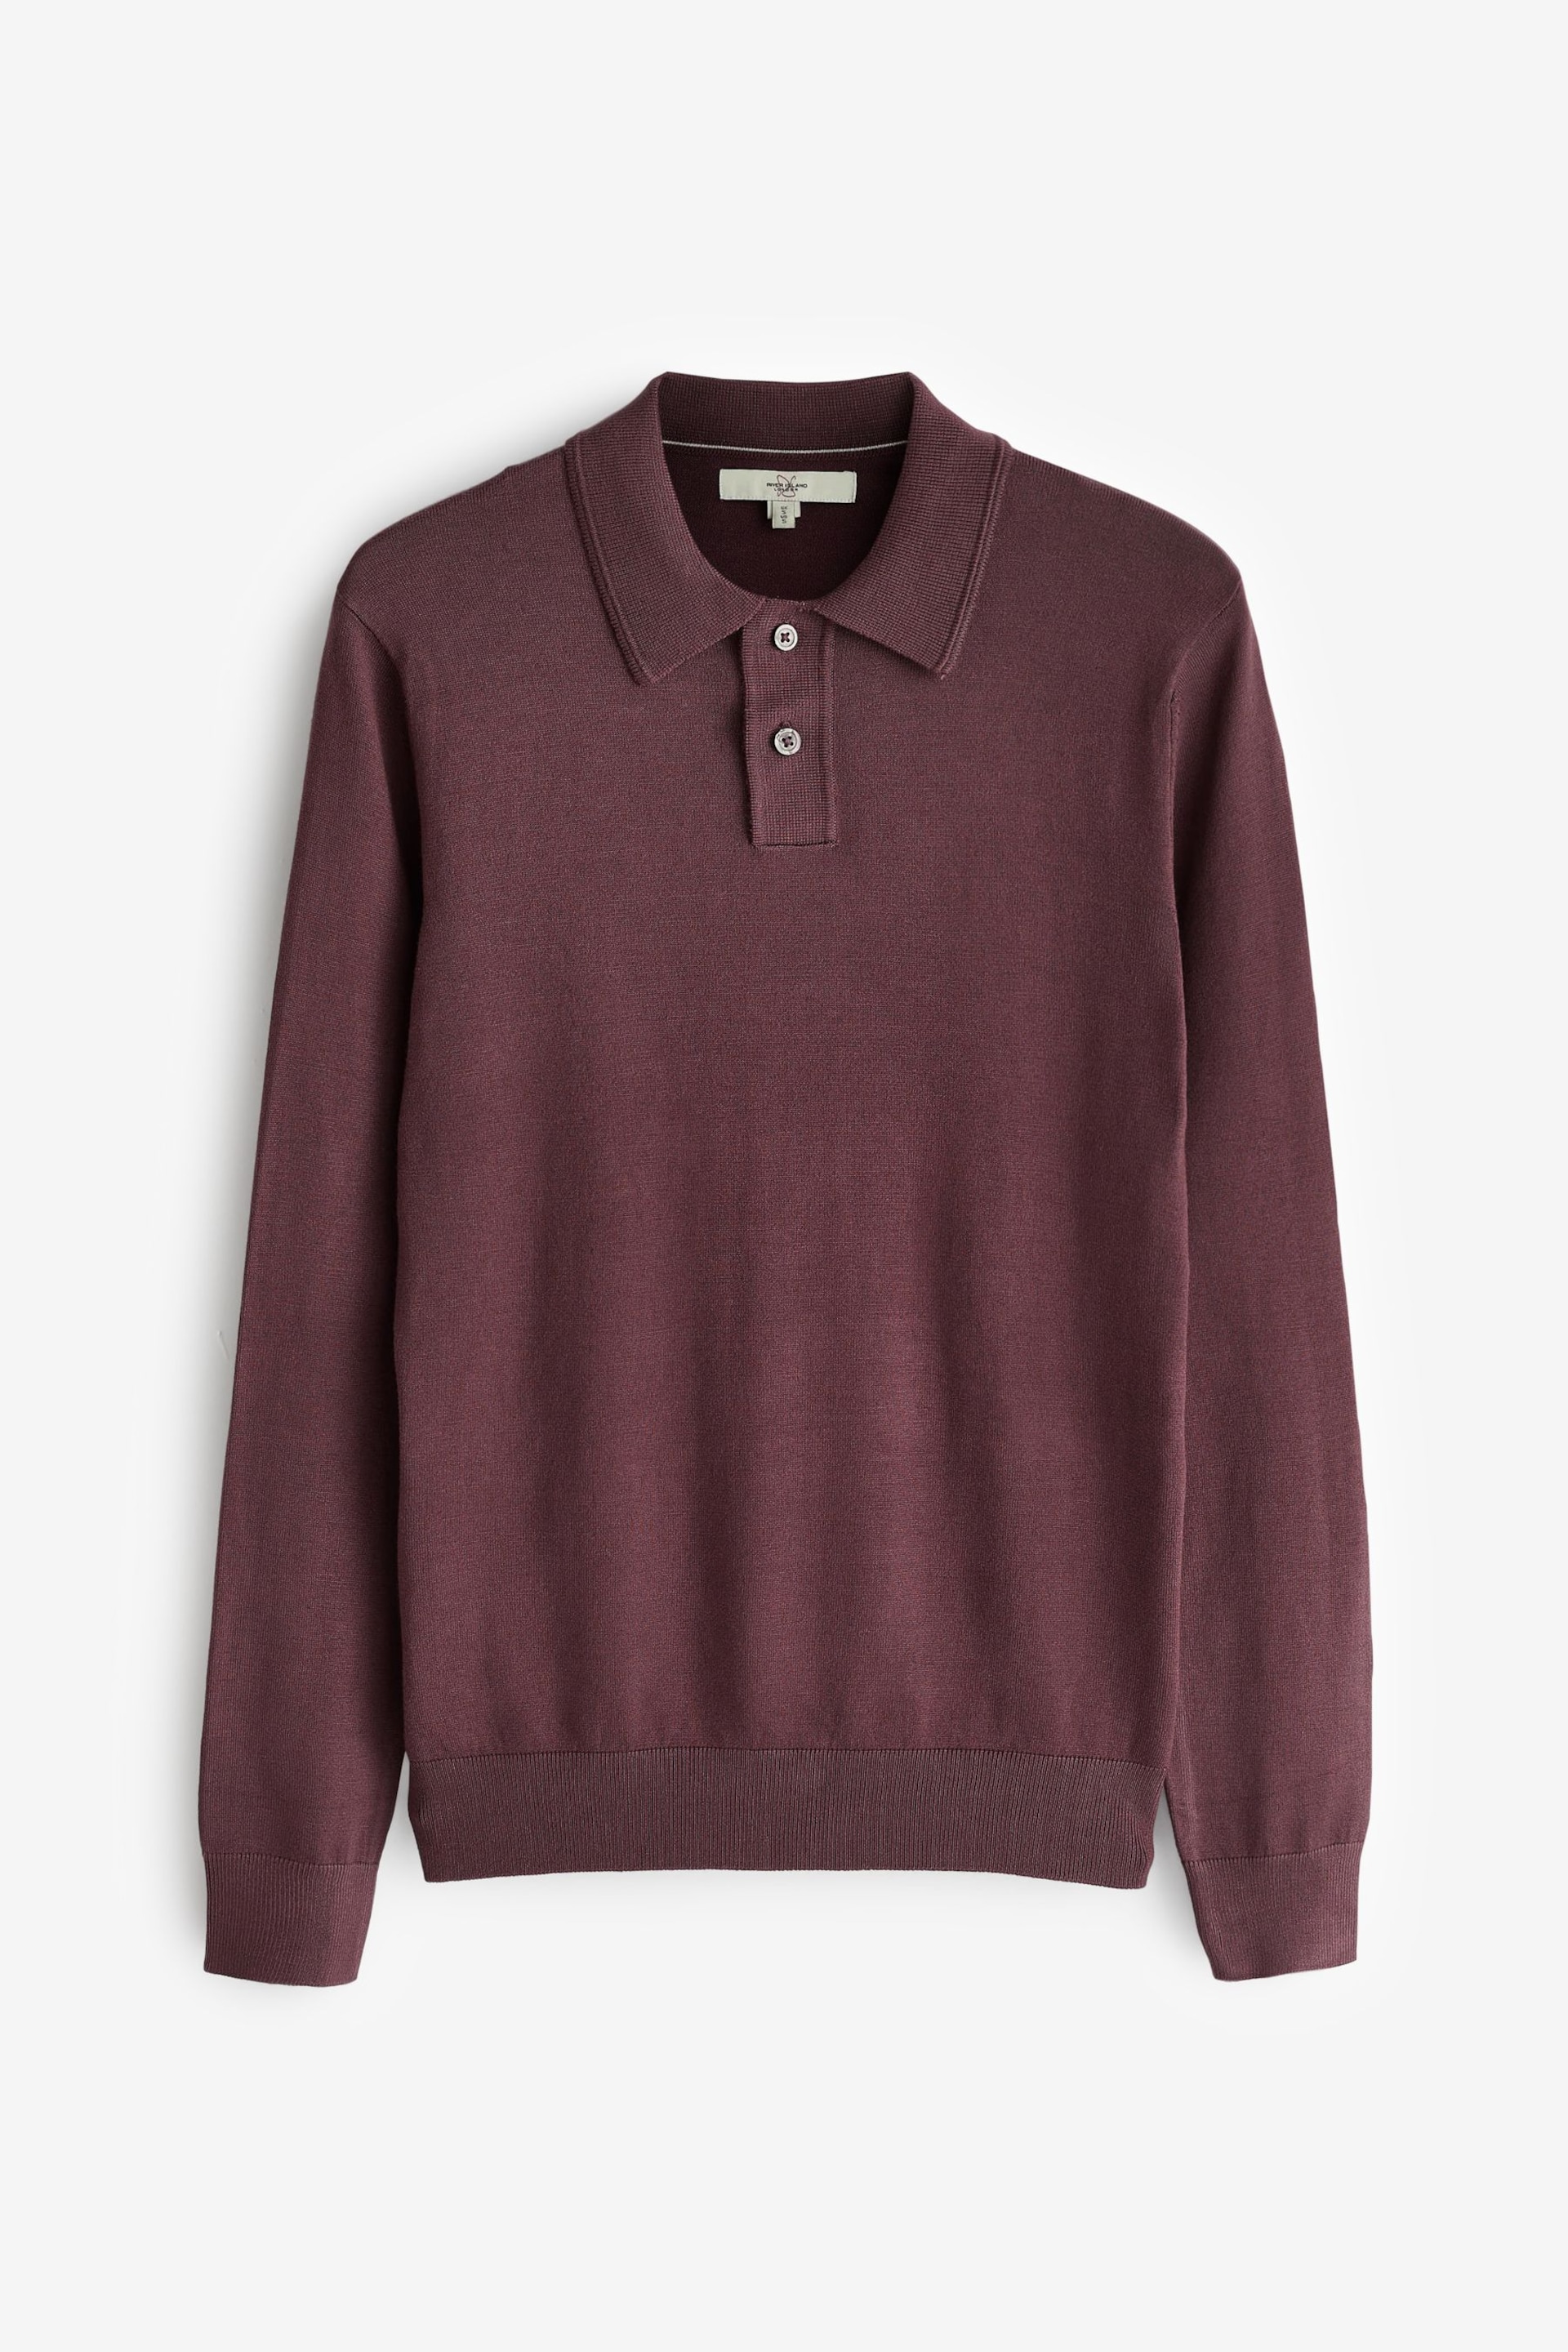 River Island Purple Knitted Polo Jumper - Image 7 of 7